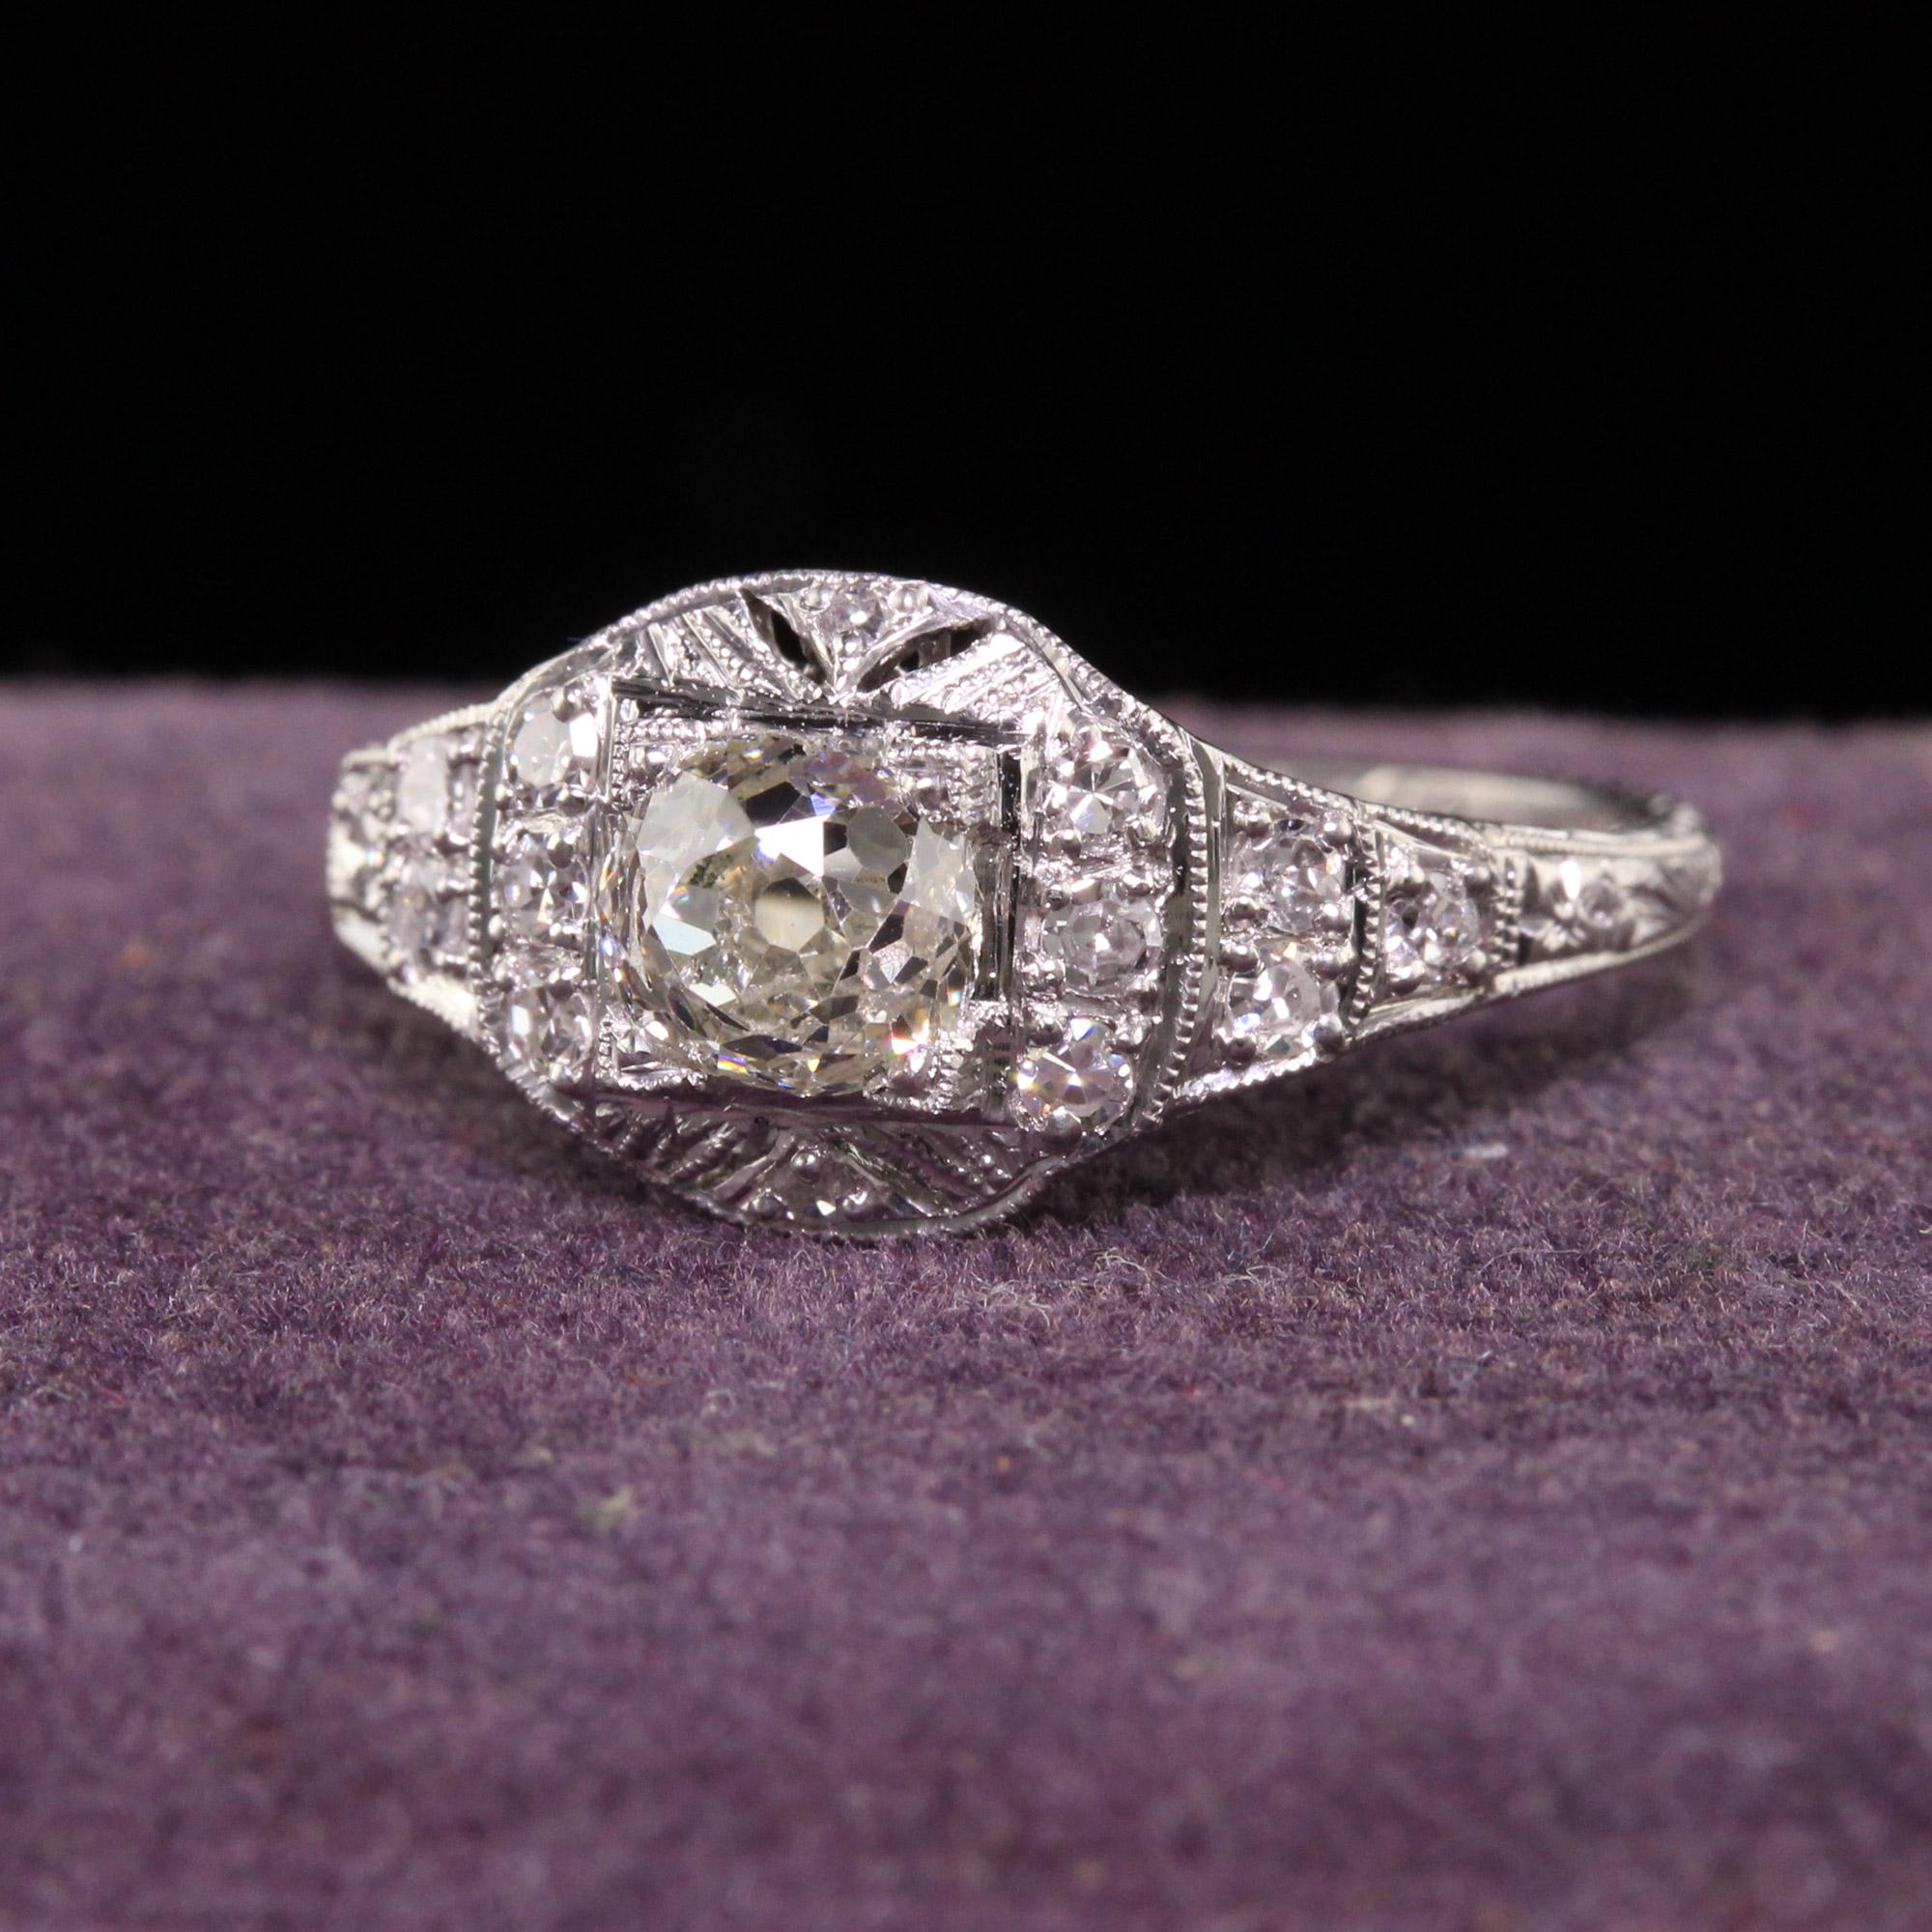 Beautiful Antique Art Deco Platinum Old Mine Diamond Engagement Ring - GIA. This gorgeous engagement ring has a GIA certified old mine cut diamond in the center of an Art Deco mounting that sits low on the finger. The ring is in great